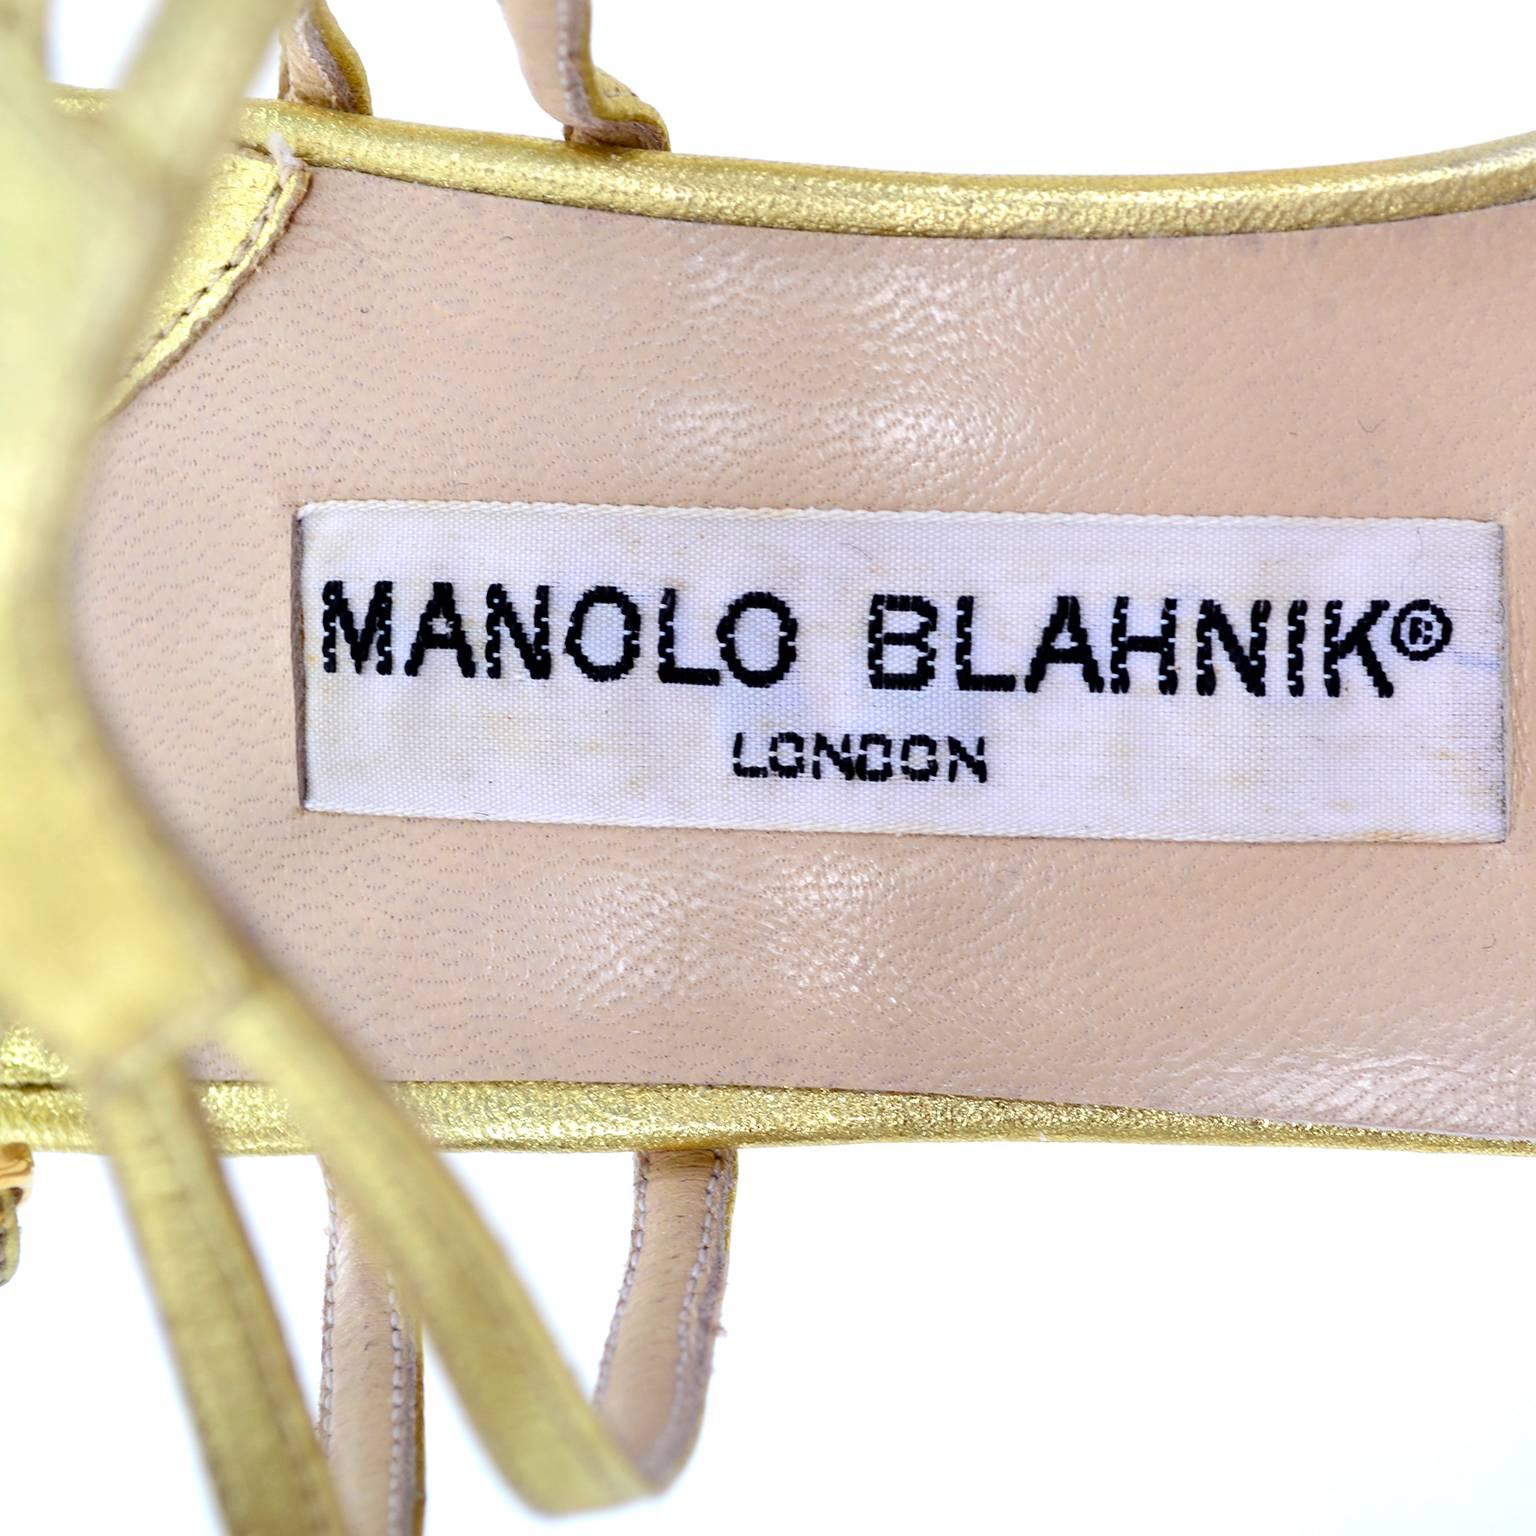 1980s Manolo Blahnik London Shoes Rare Vintage gold Metallic Strappy Heels 39 In New Condition For Sale In Portland, OR